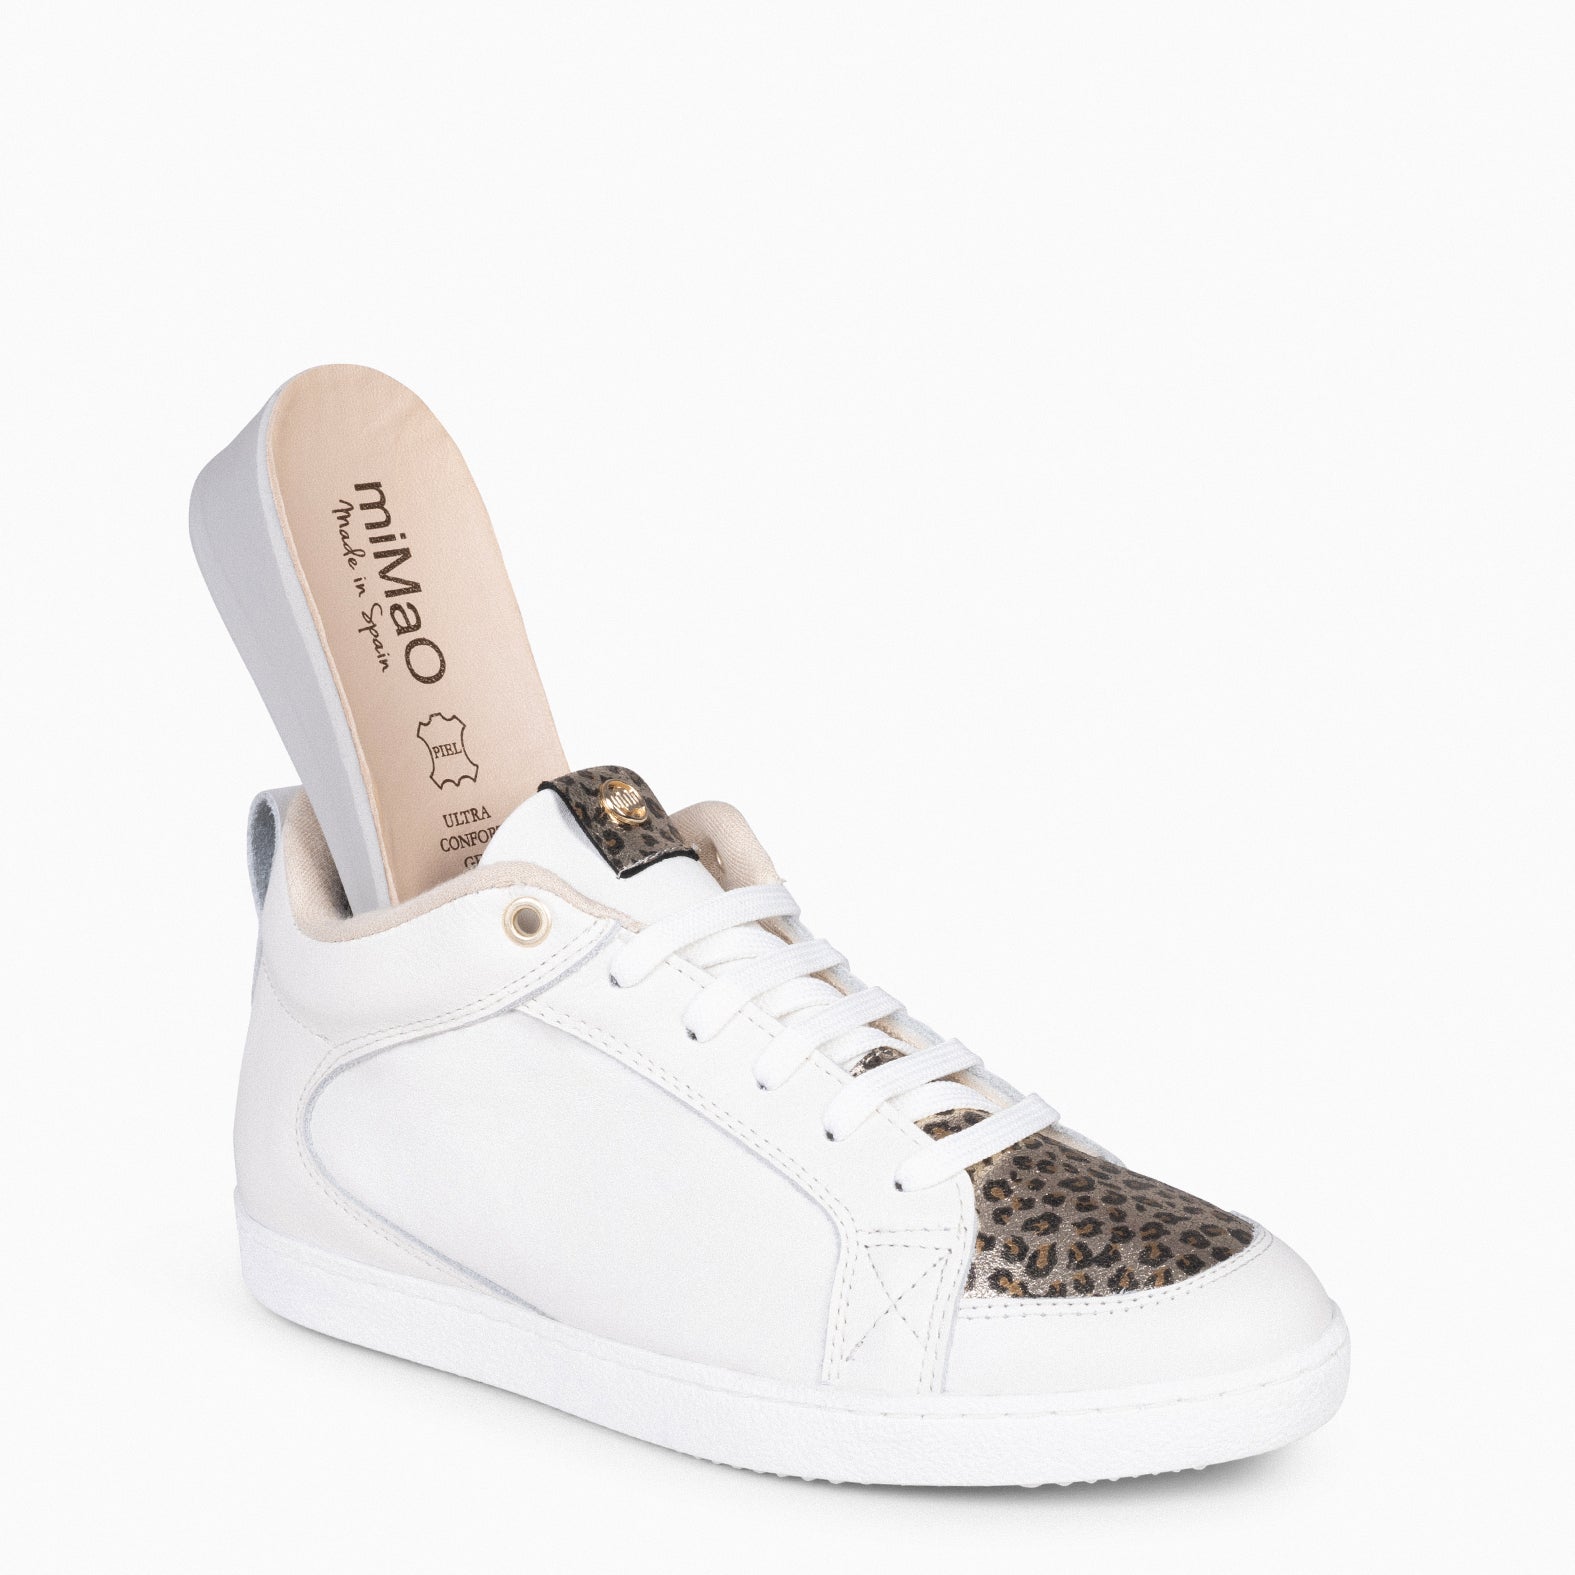 Marina Militare Women's wedge sneakers: for sale at 29.99€ on Mecshopping.it